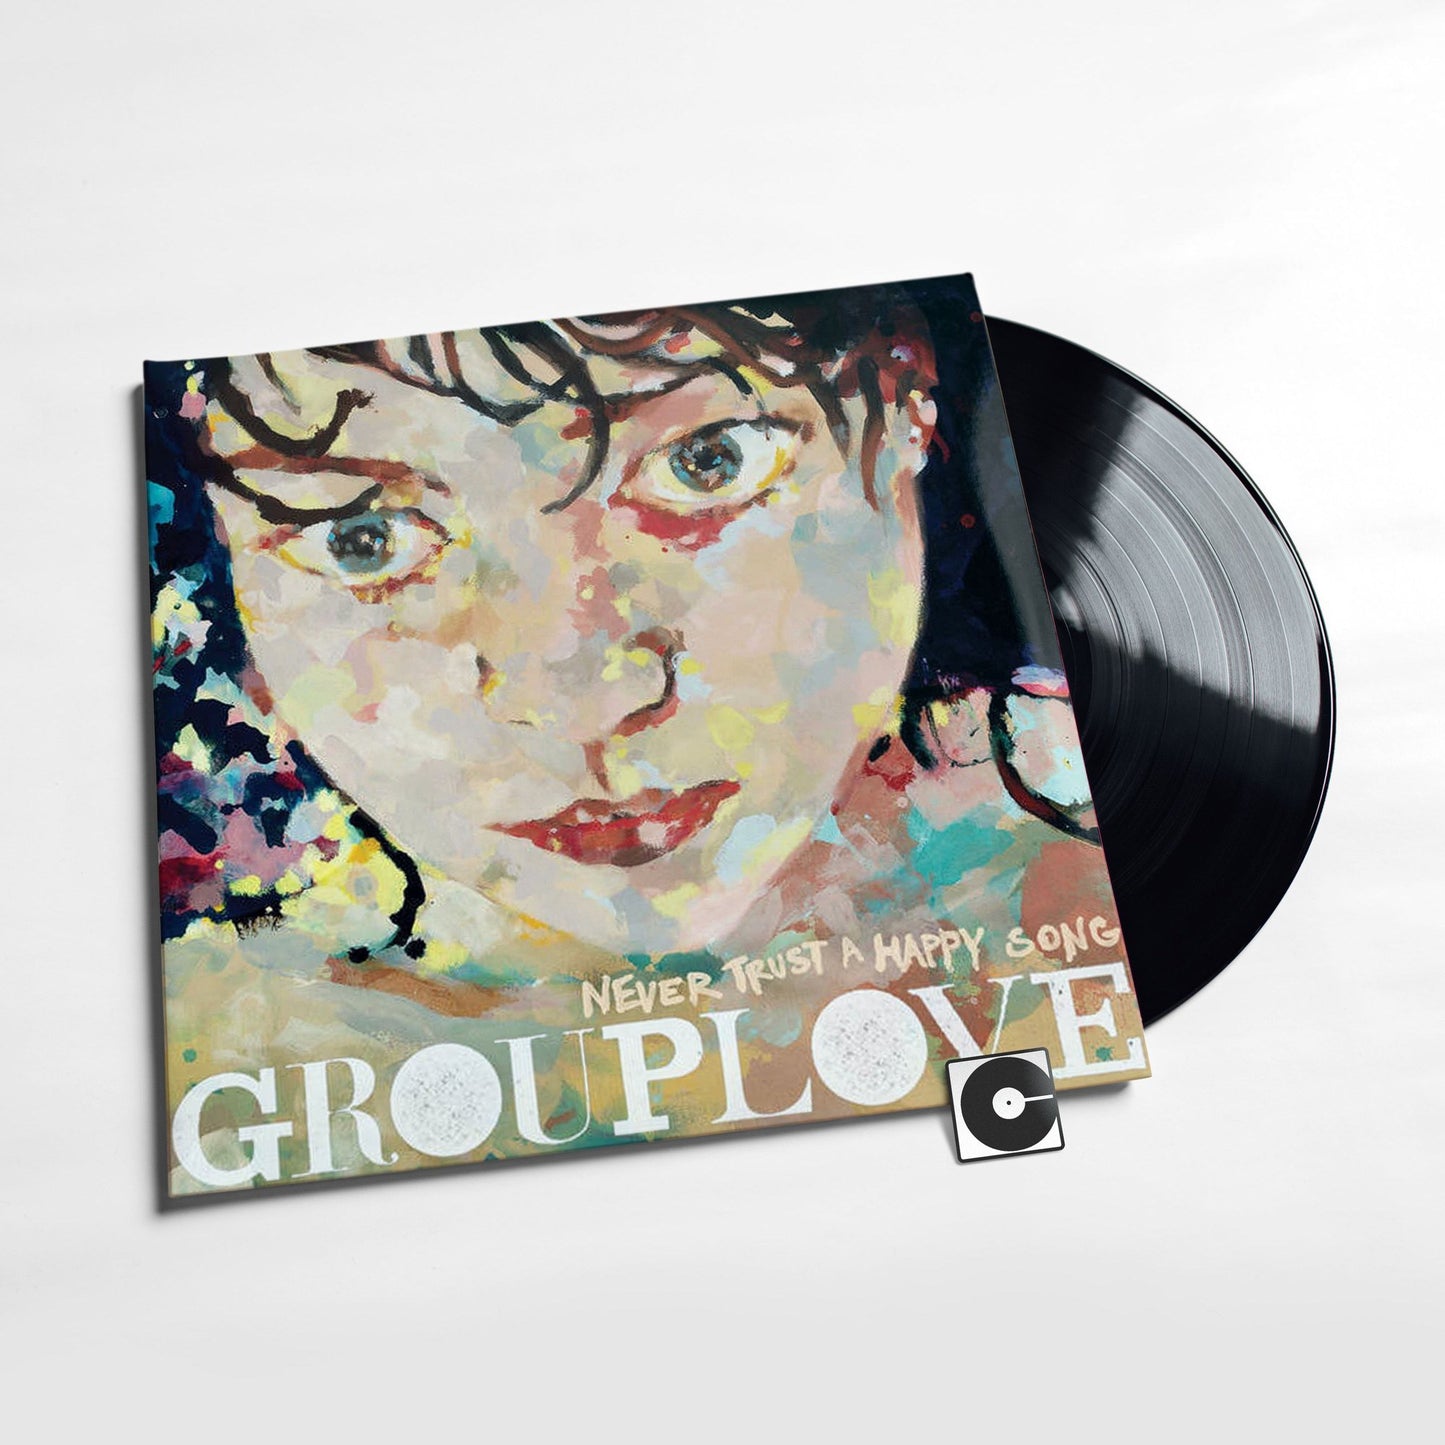 Grouplove - "Never Trust A Happy Song"